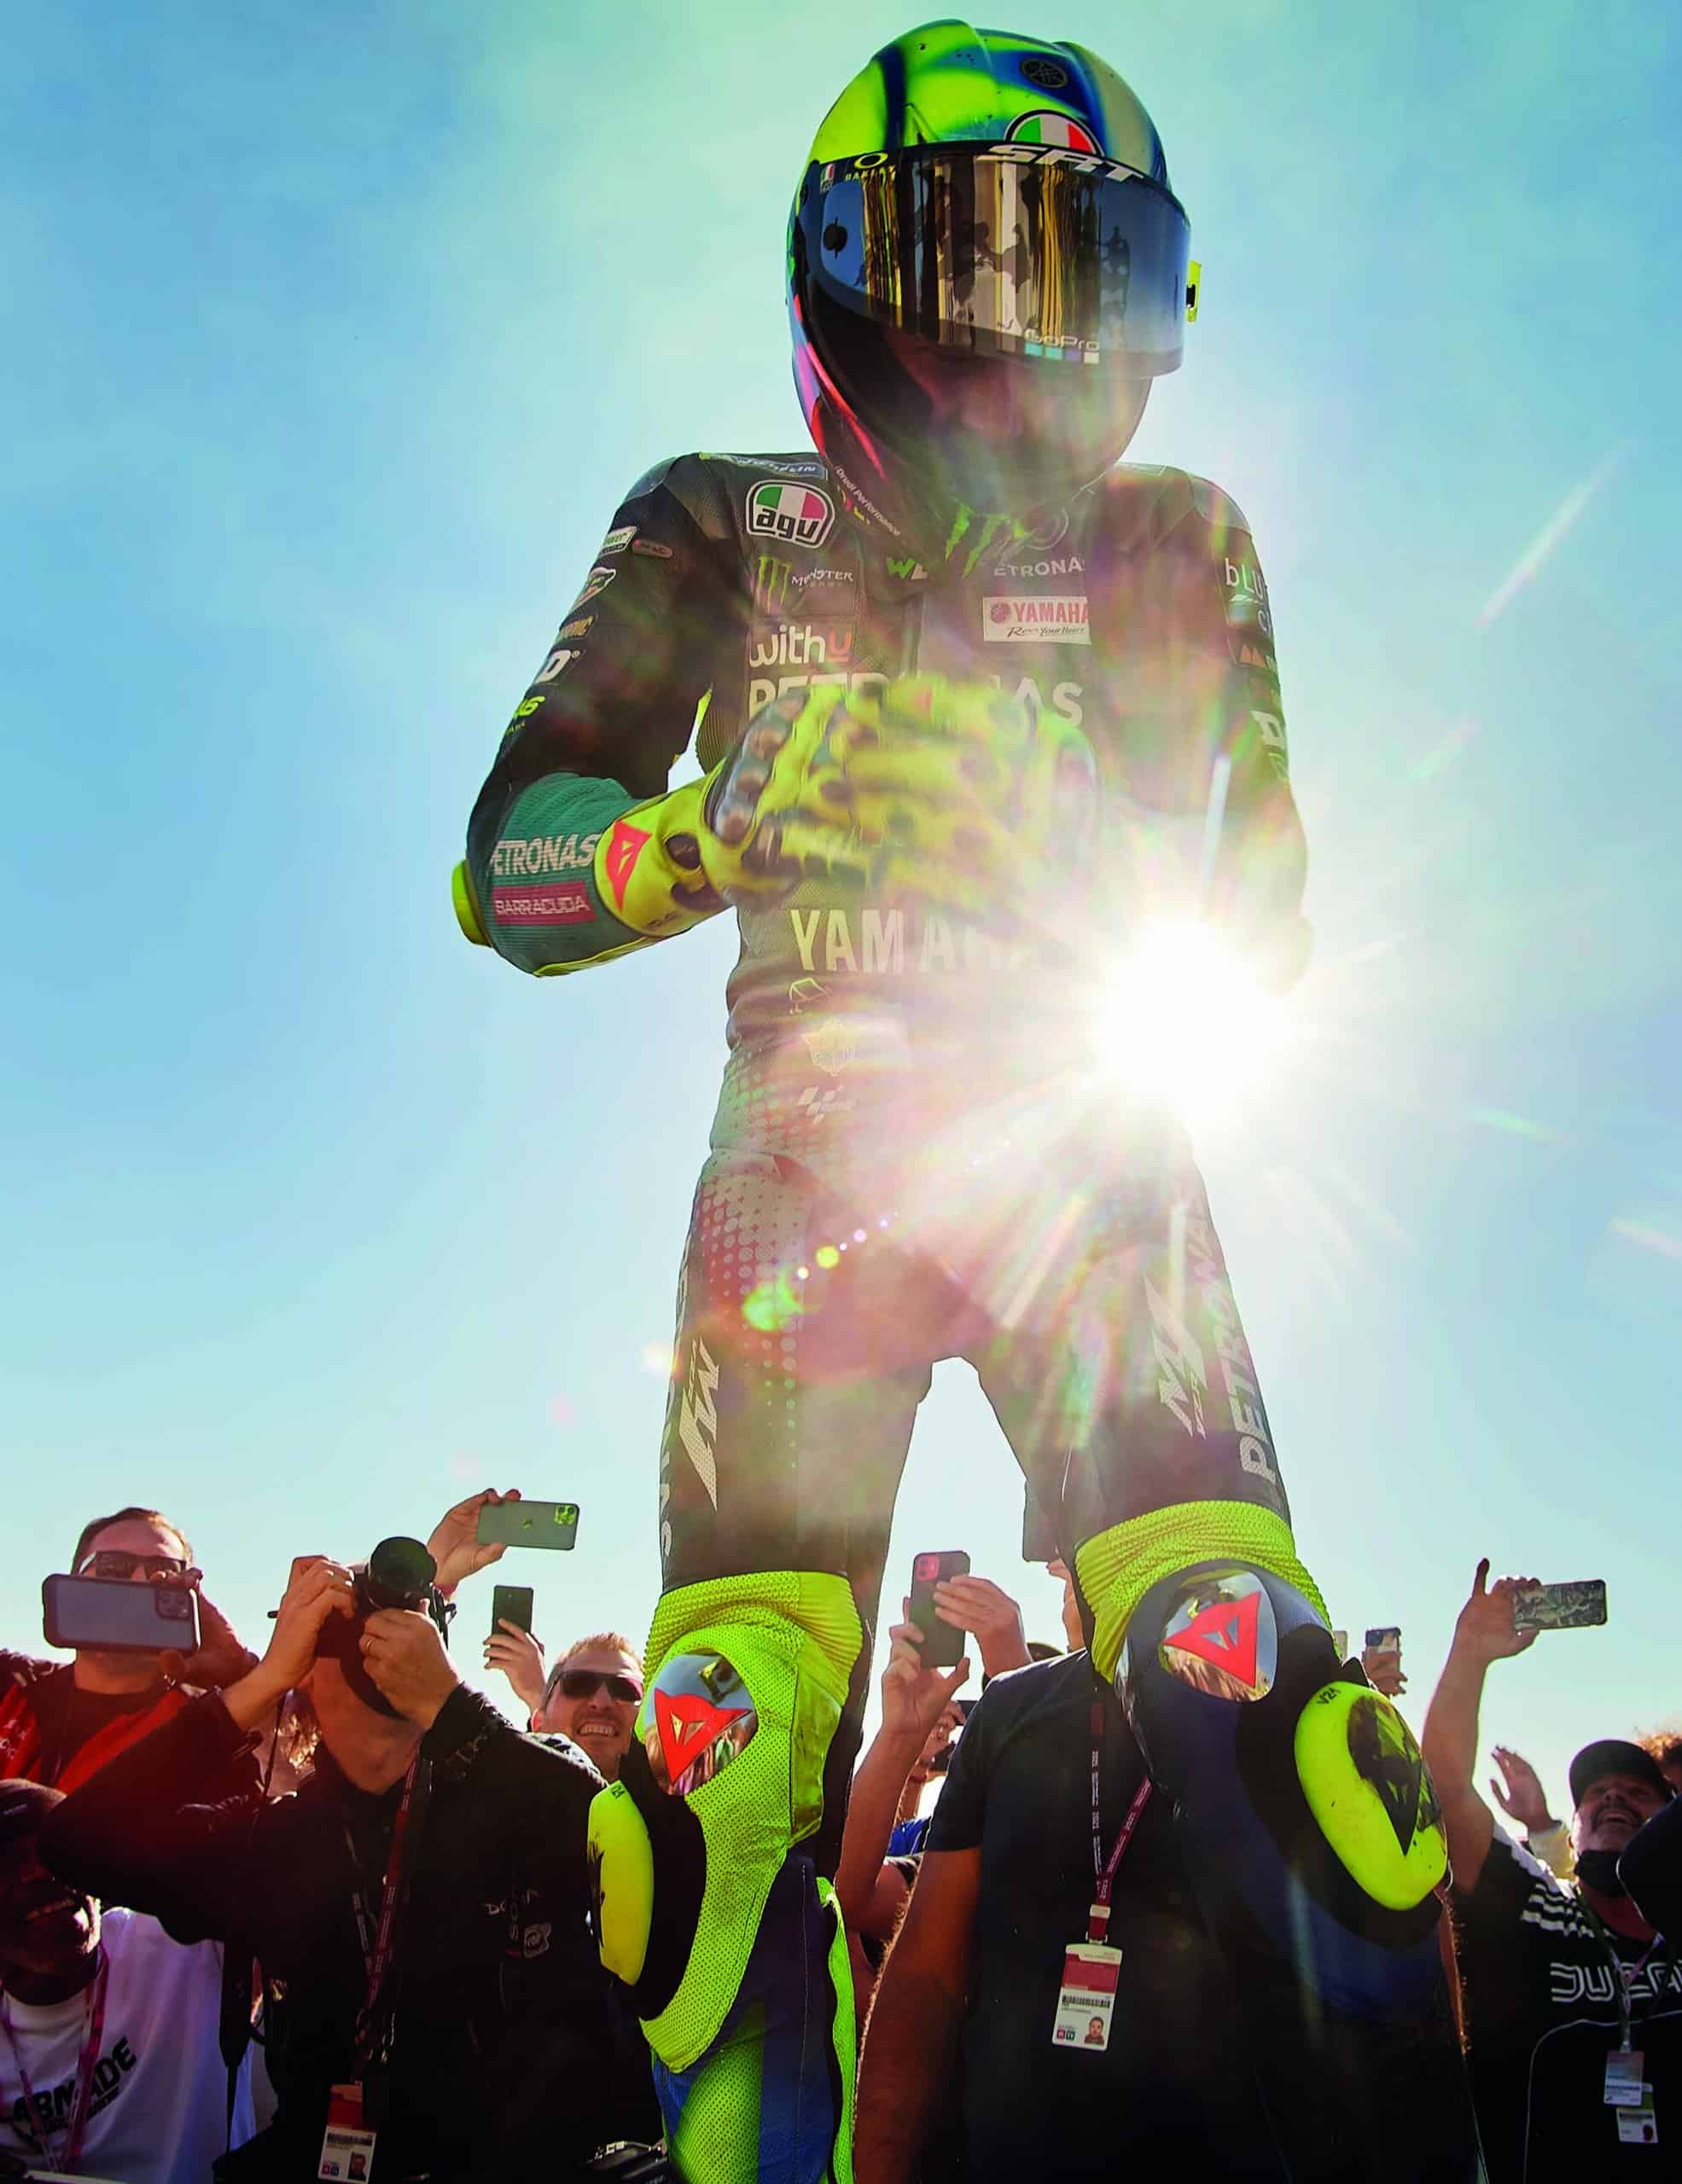 Sun-shines-behind-Valentino-Rossi-surrounded-by-fans